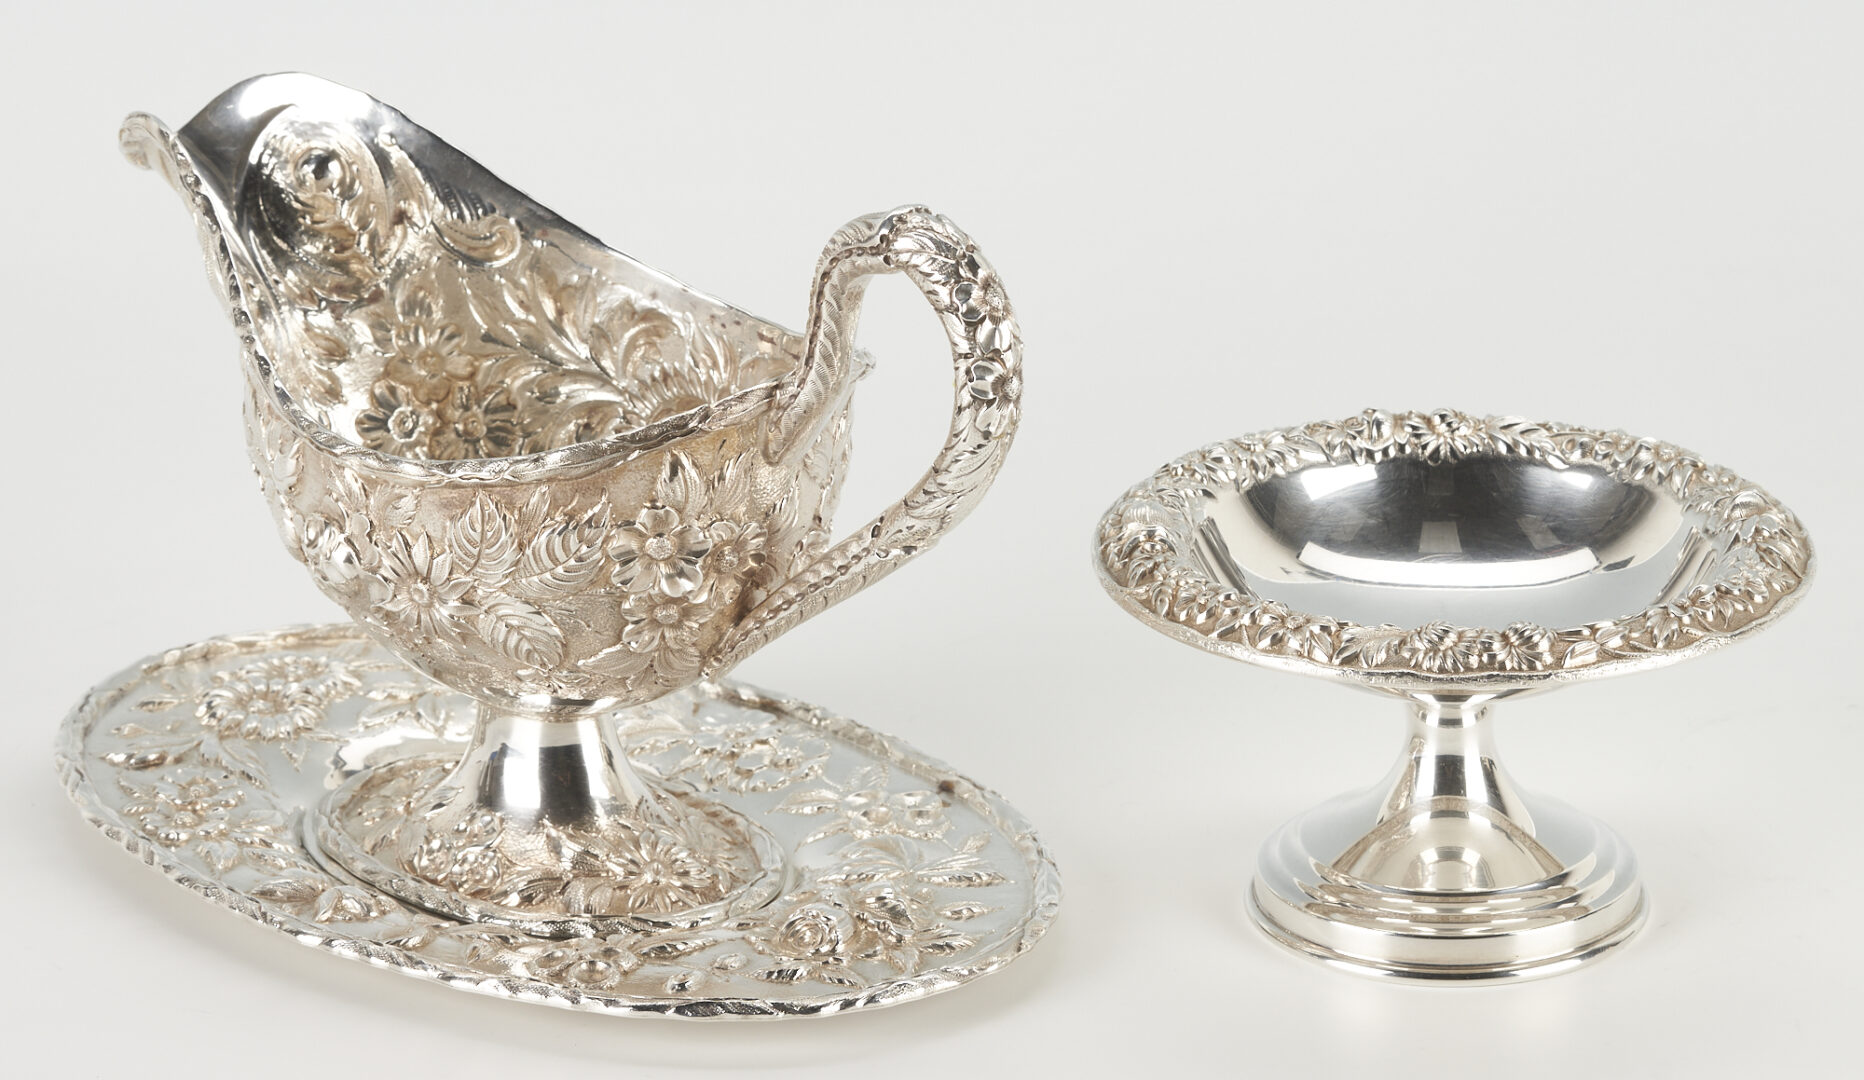 Lot 298: 9 Kirk Sterling Repousse Table Items incl. Gravy Boat, Hand Decorated